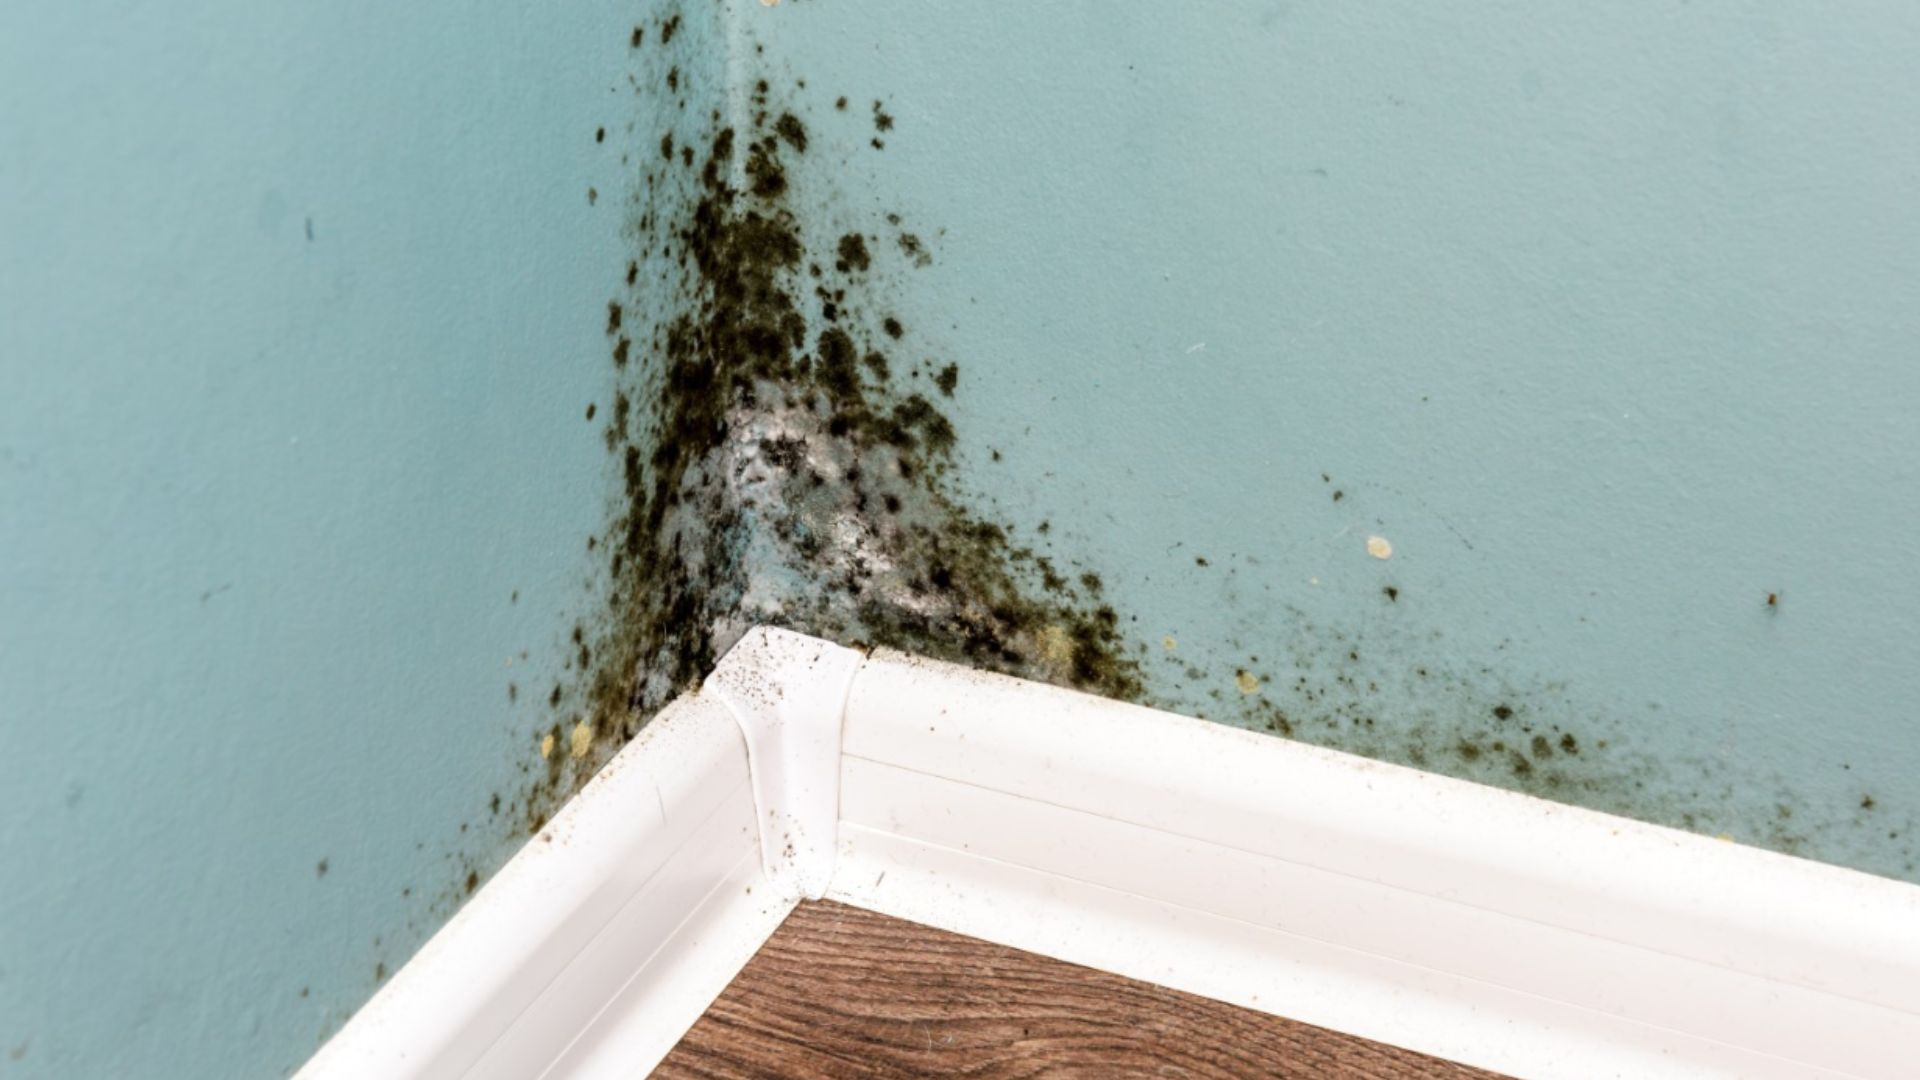 mold growth in the corner of a wall